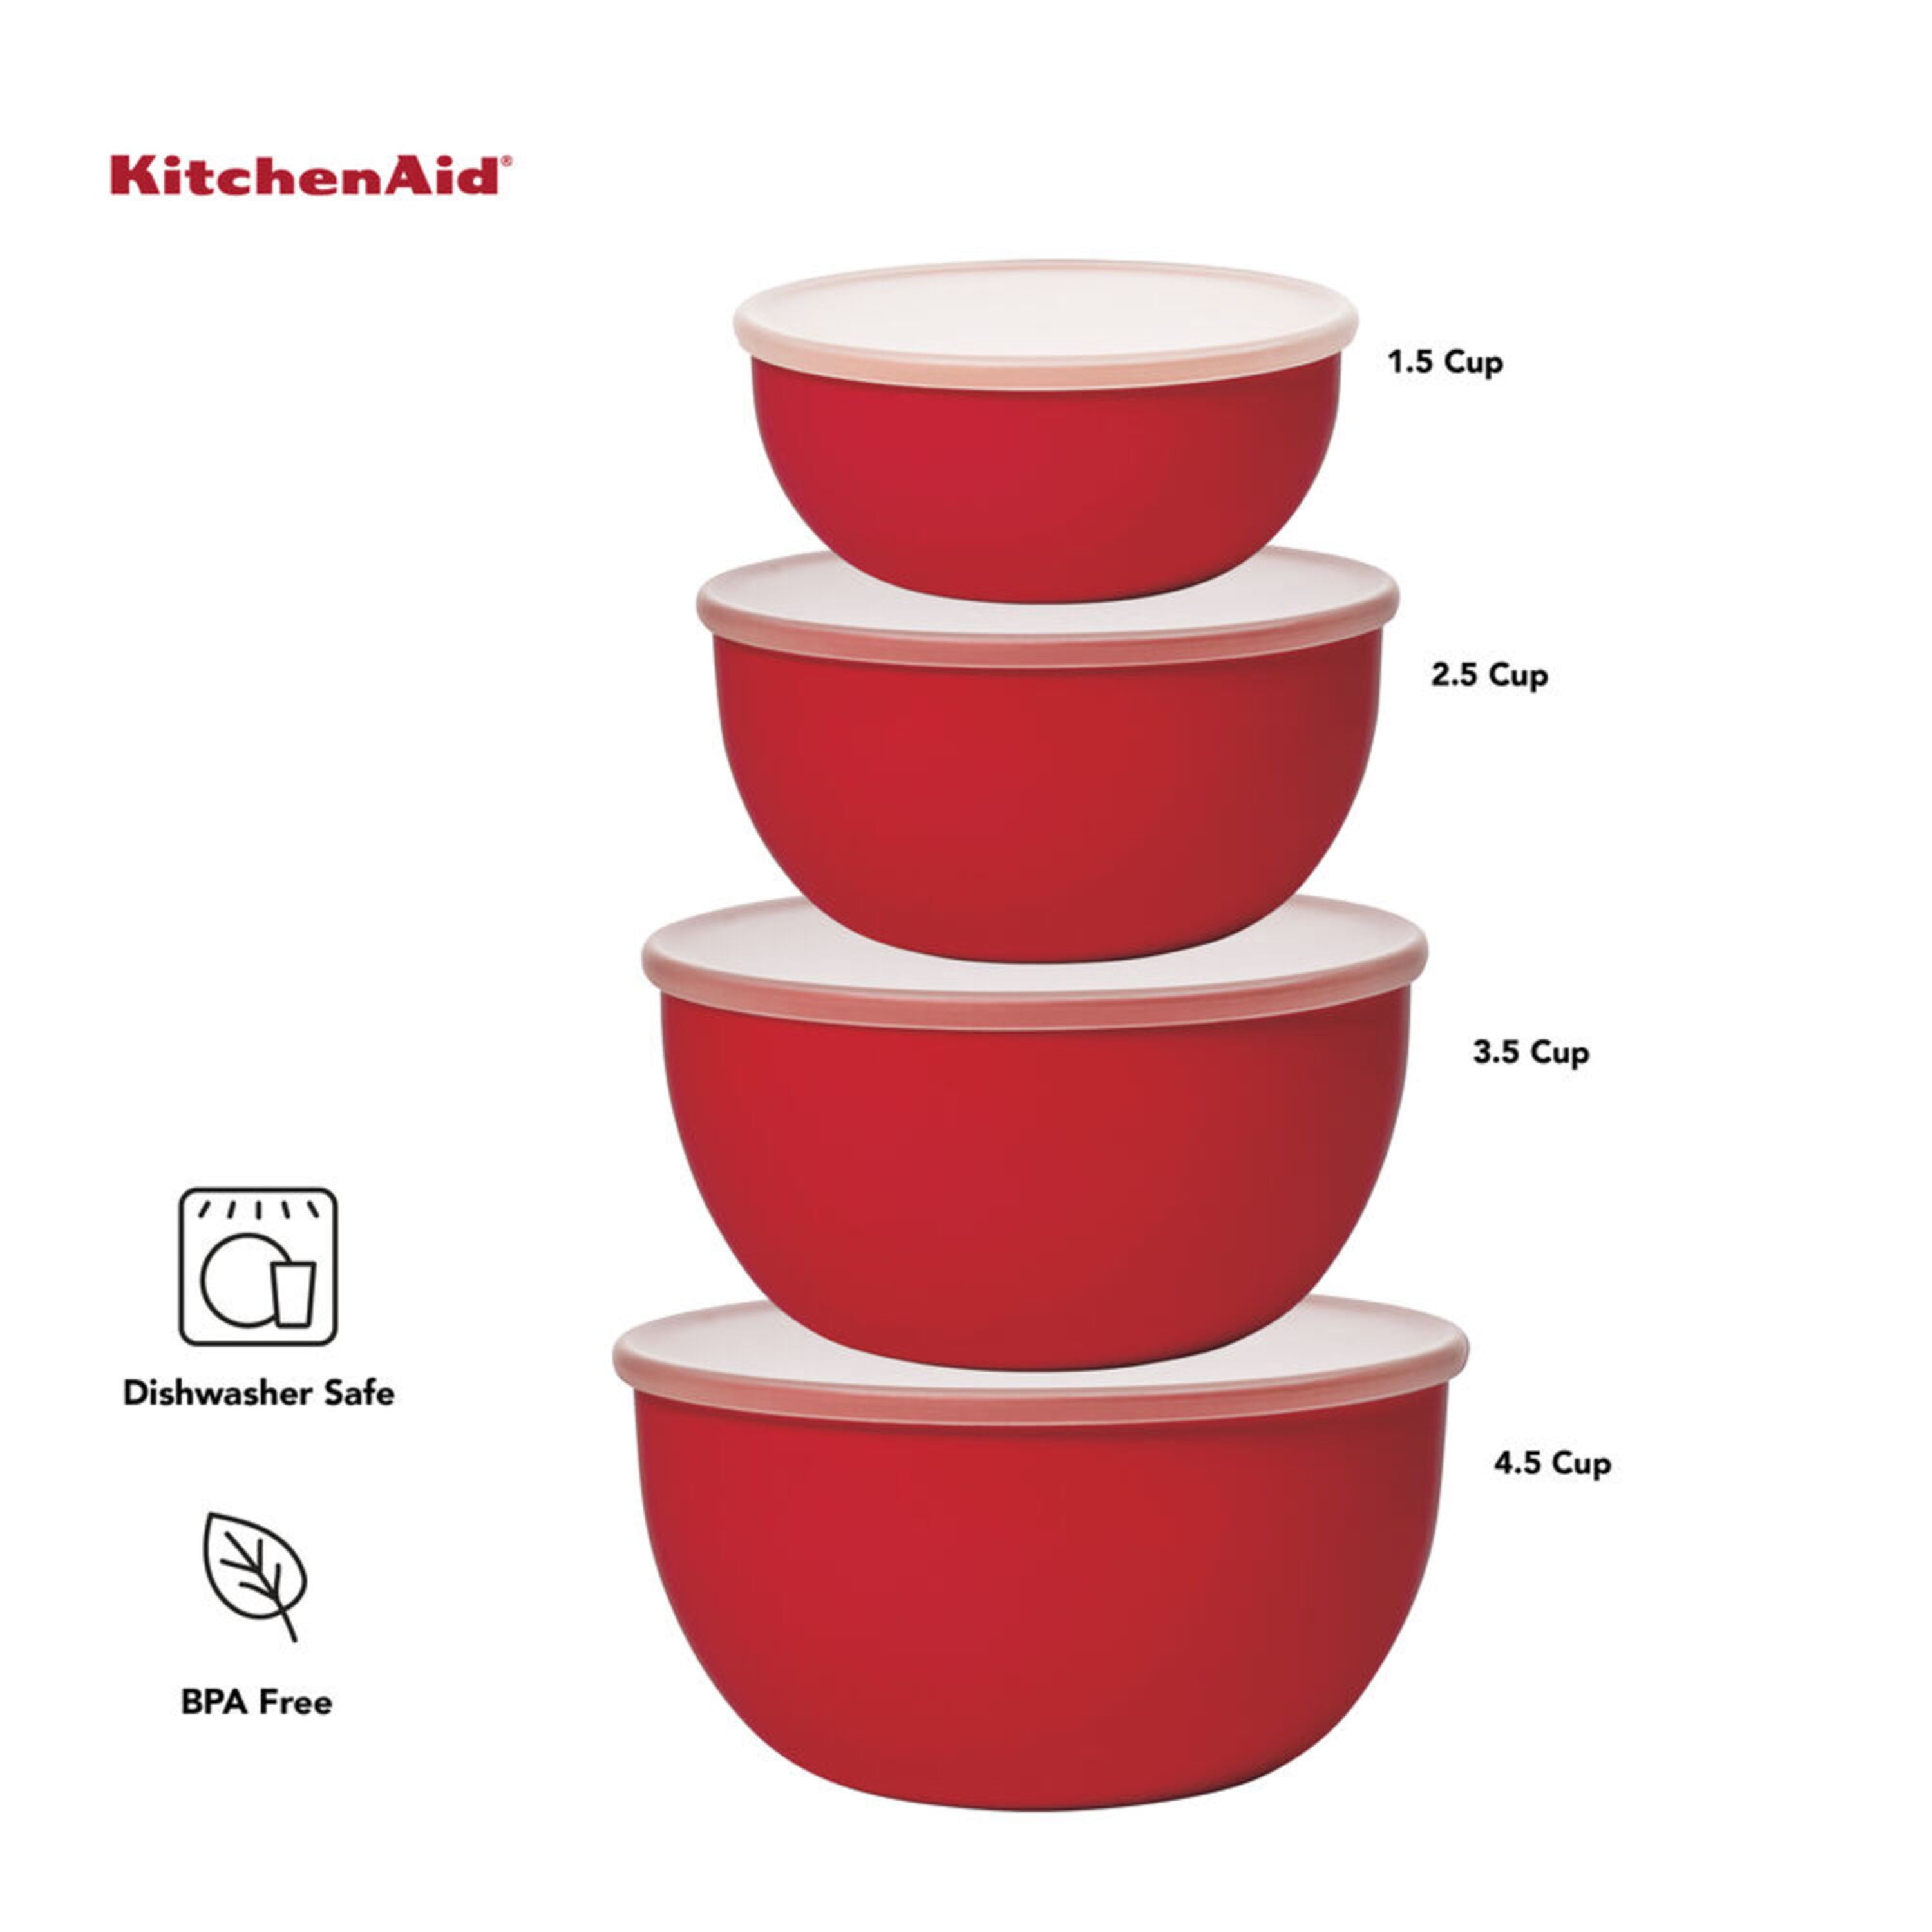 KitchenAid 21-Piece Mixing Bowl and Measuring Set only $20!